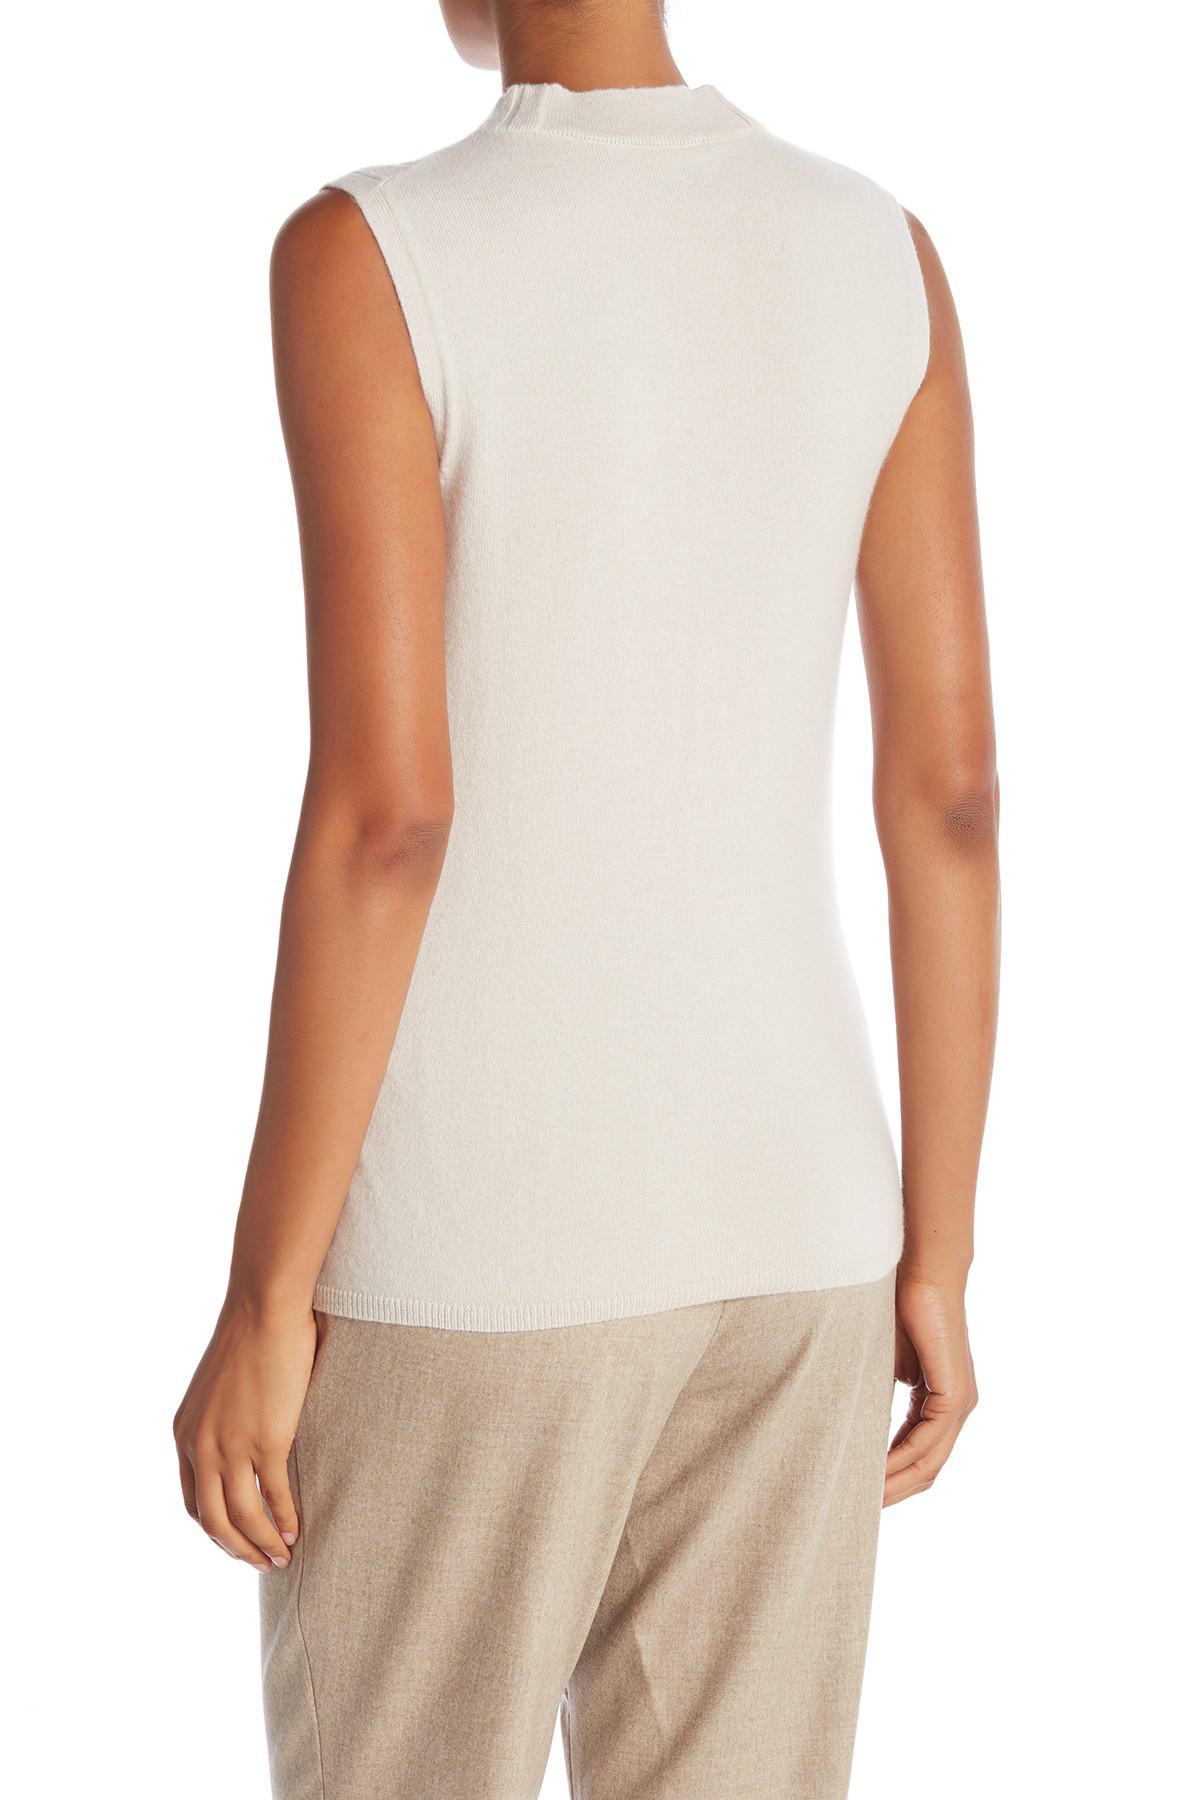 Download Lafayette 148 New York Rib Mock Neck Cashmere Tank Top in ...